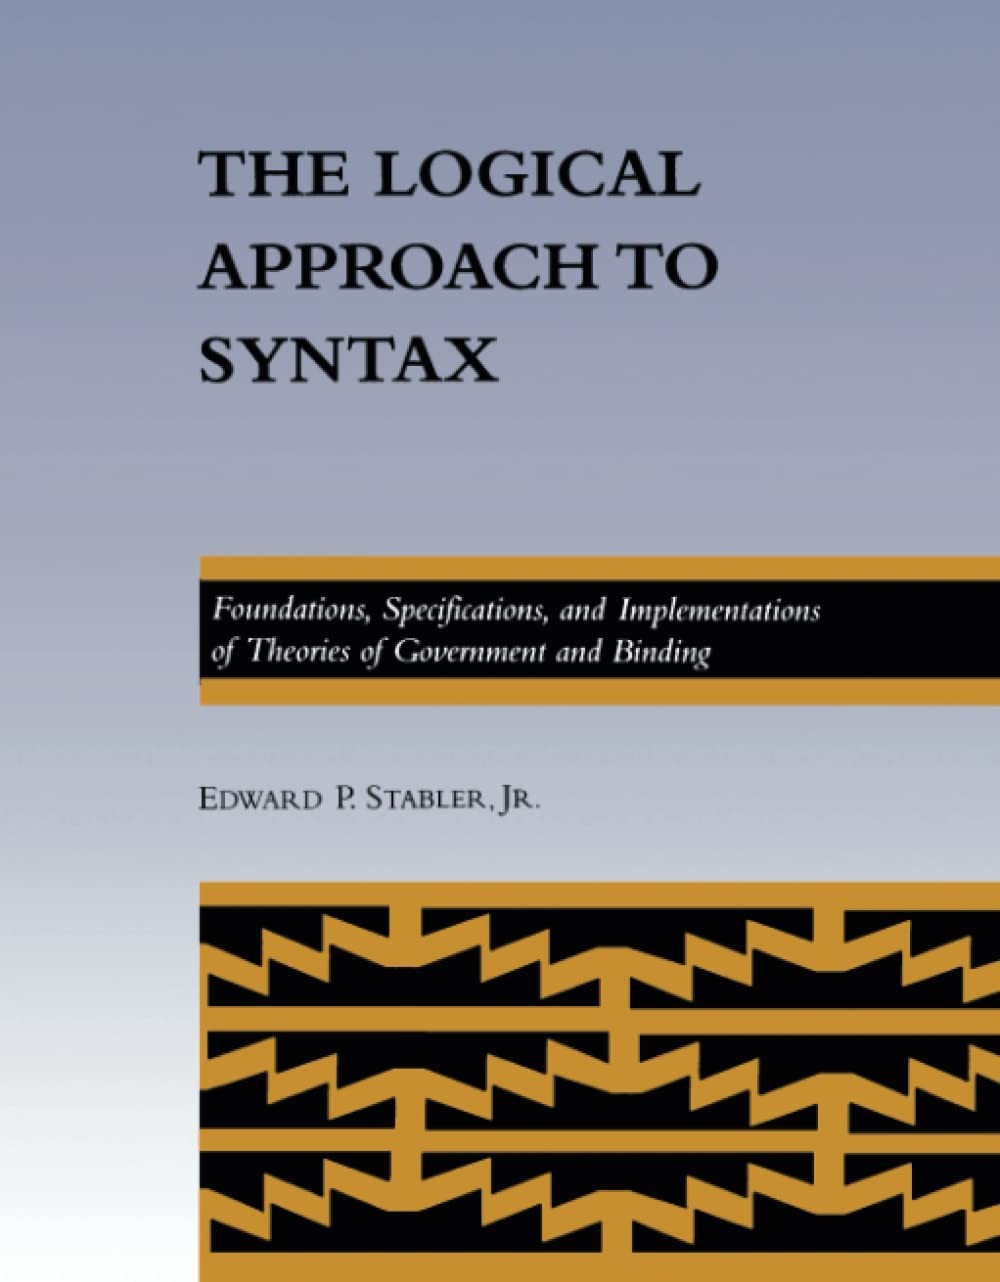 The Logical Approach to Syntax: Foundations, Specifications, and Implementations of Theories of Government and Binding